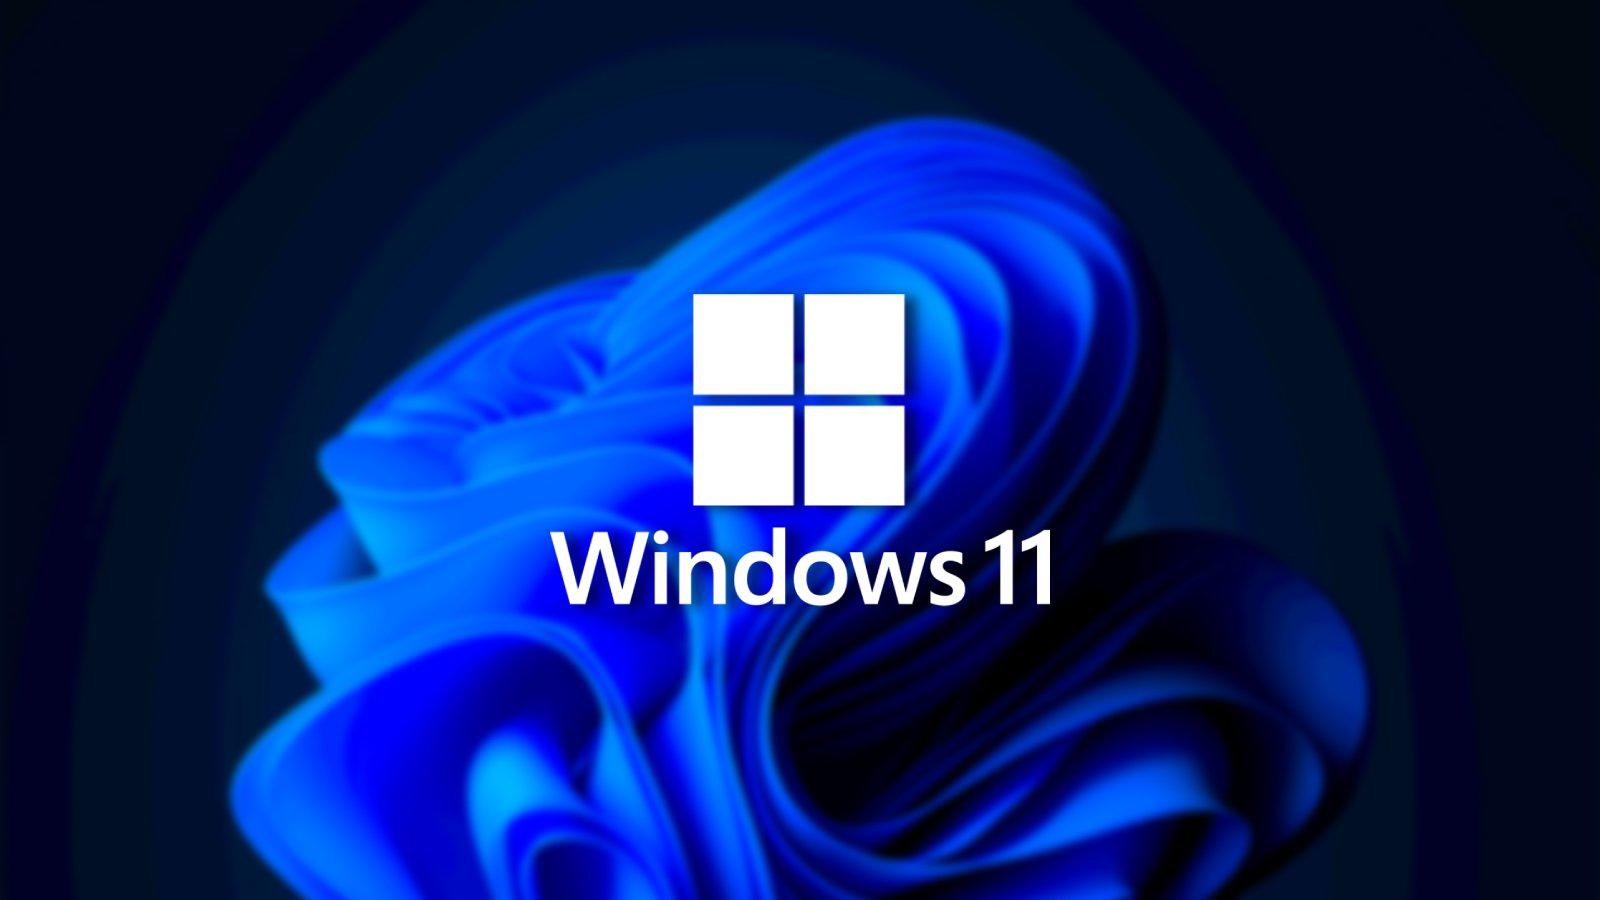 Microsoft wants you to learn more about new features in Windows 11 ...